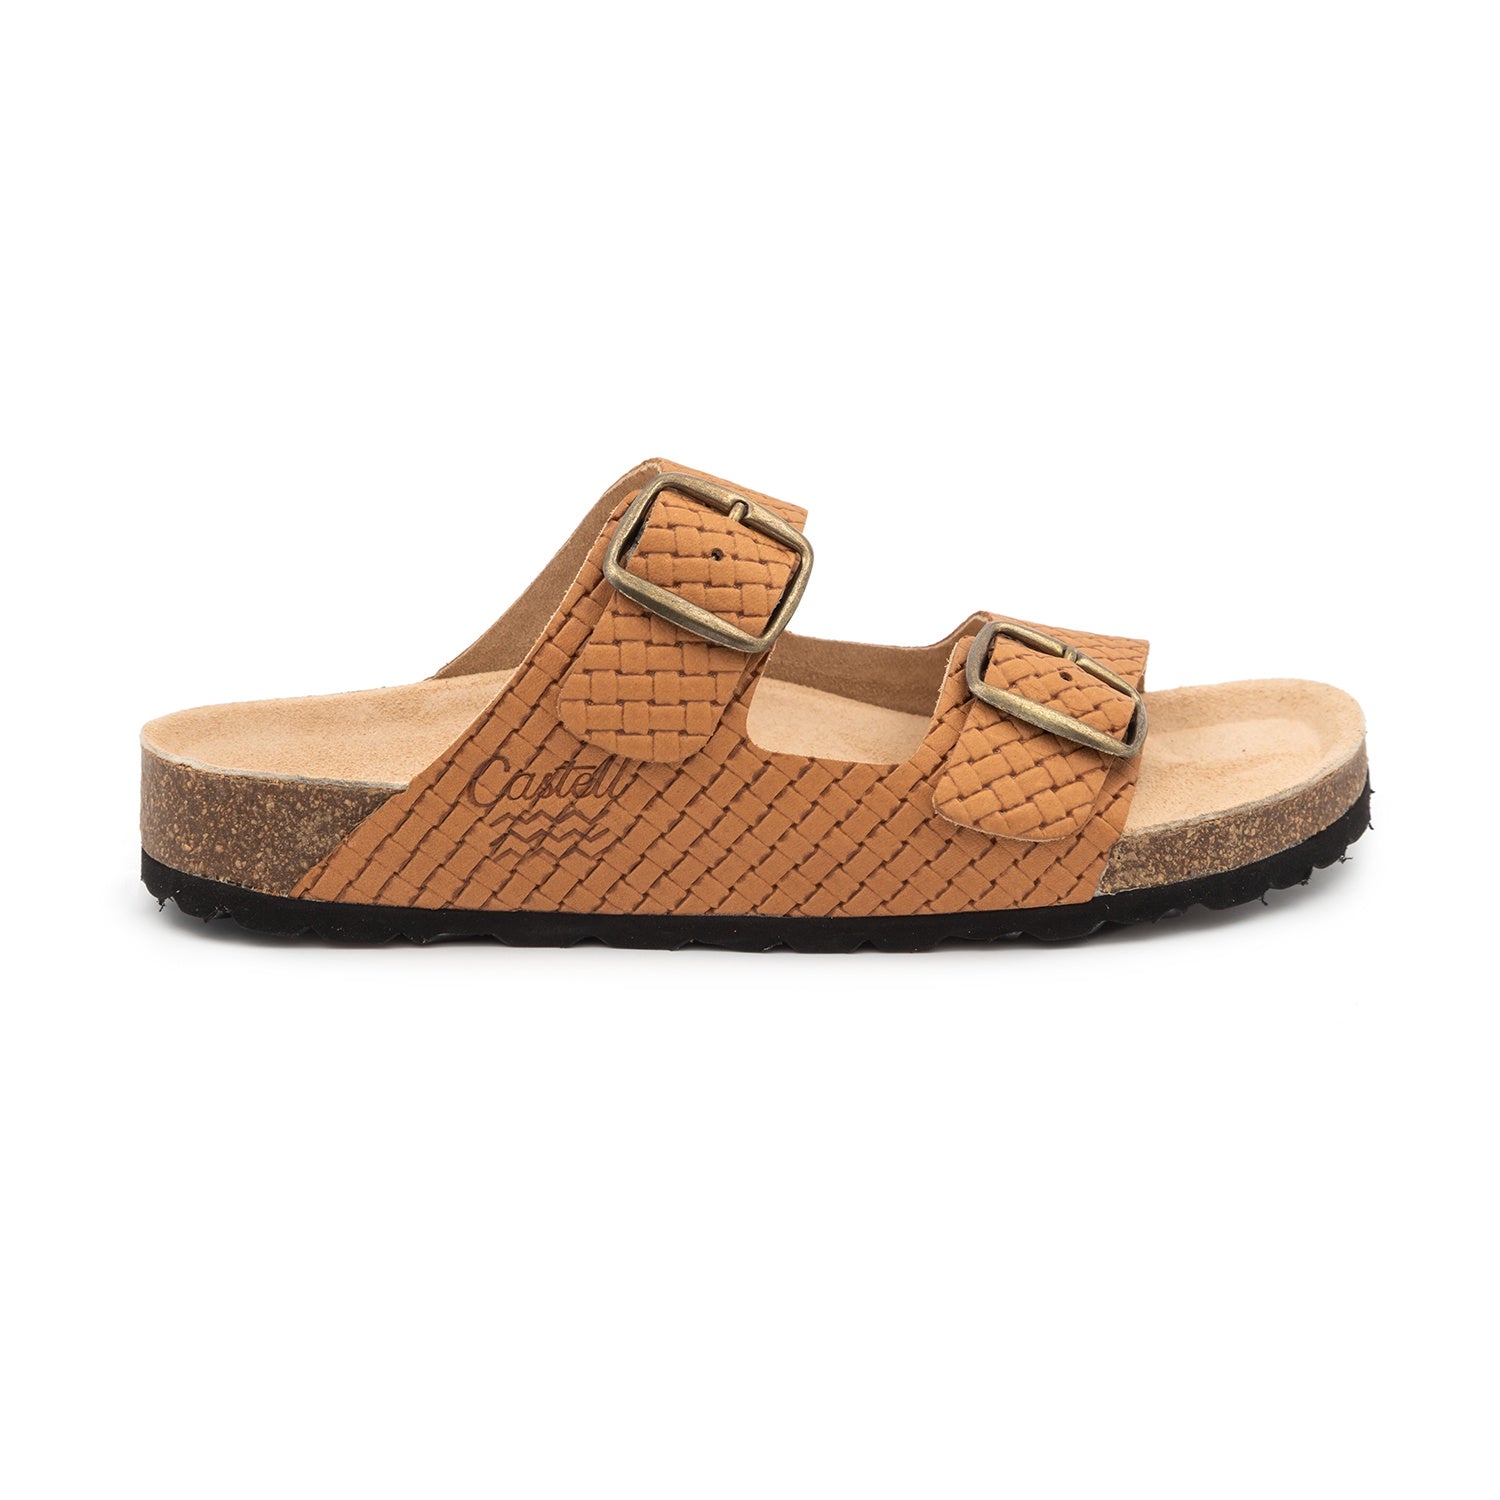 Plain Leather Sandal With Open Toe For Women - 1727 M Greco Trenza